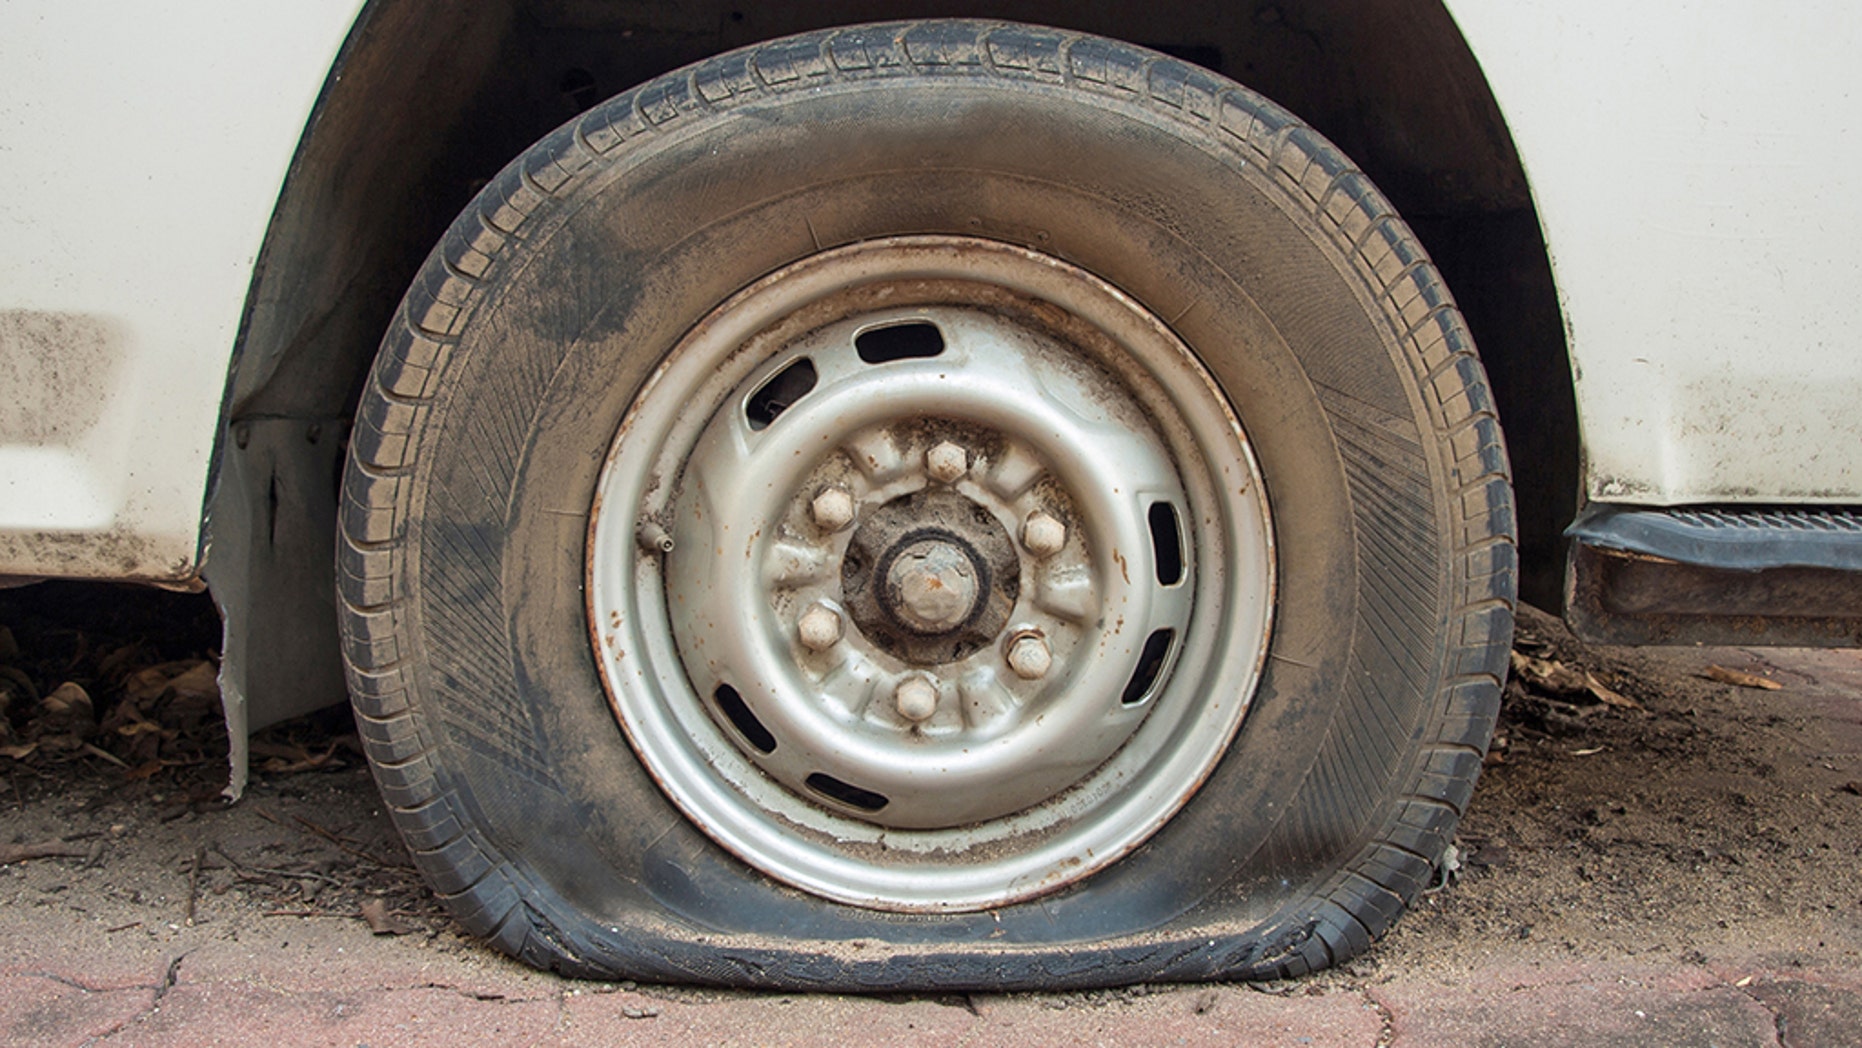 A police chief in Palestine was suspended for helping a group of Israeli soldiers change a flat tire. (istock)